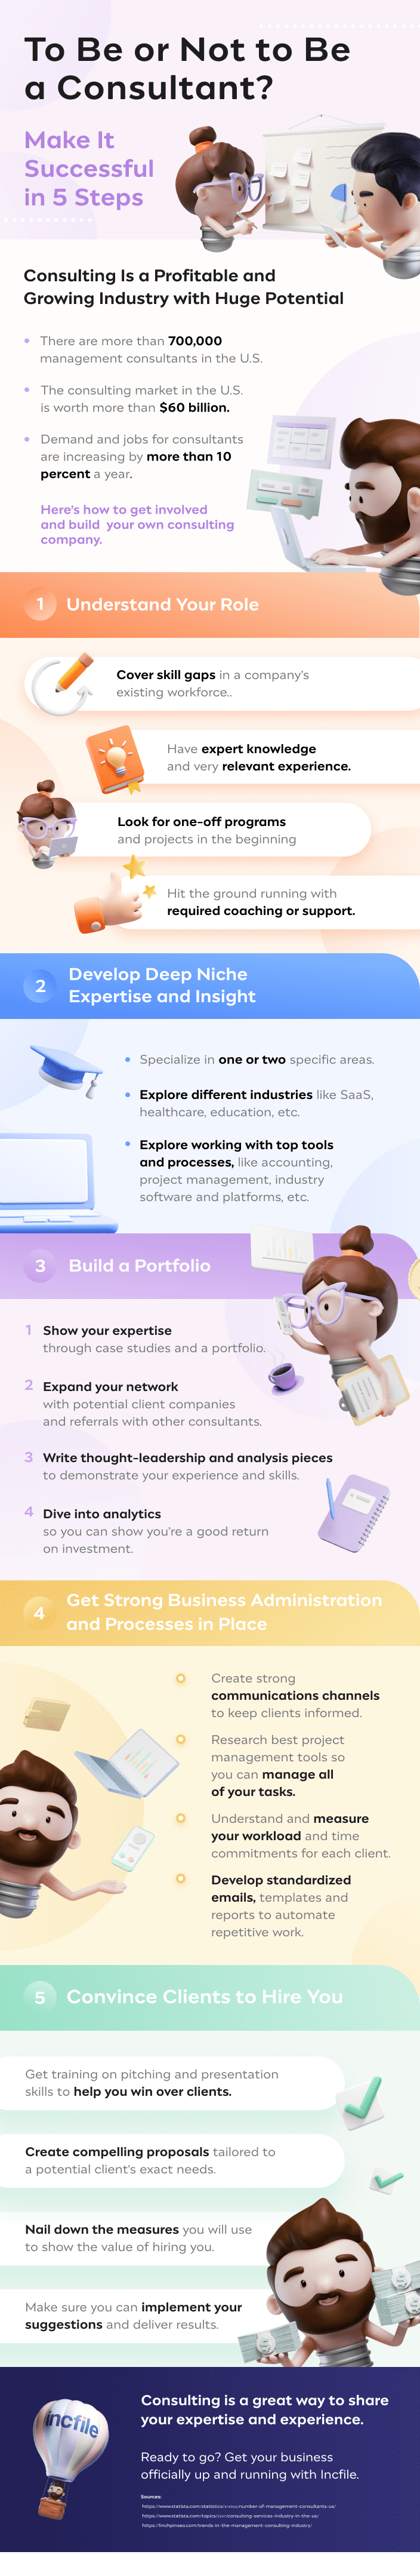 how-to-be-successful-consultant-Infographic